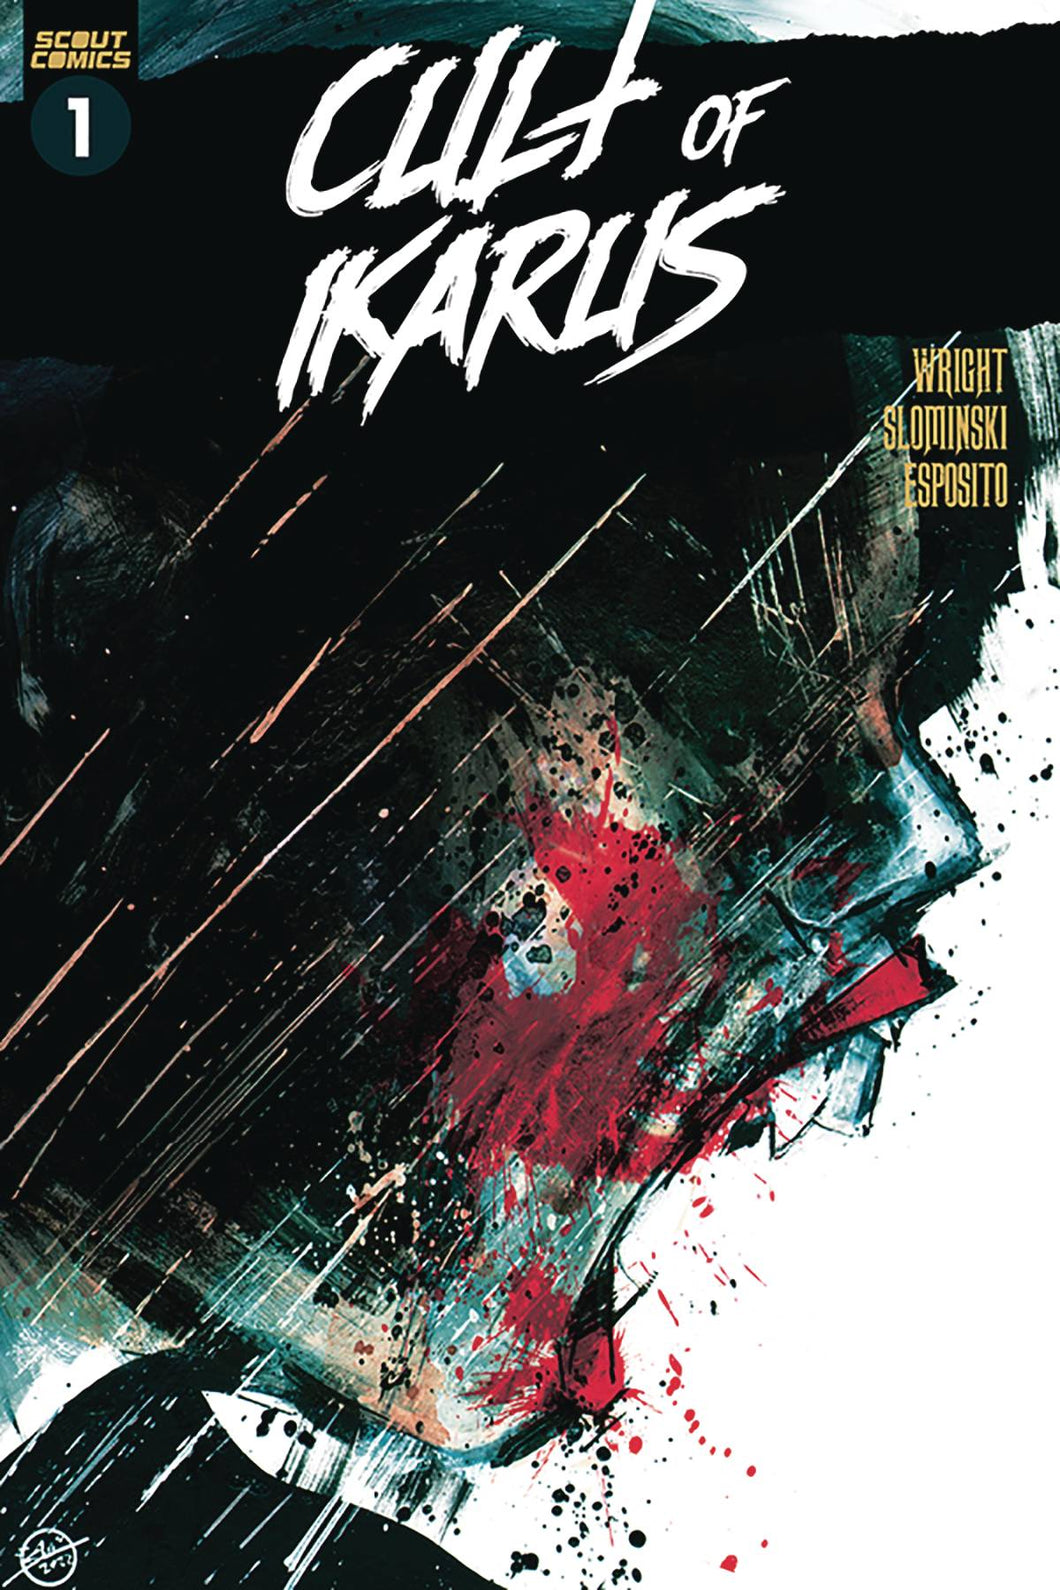 Cult of Ikarus #1 - 2nd Print (Cover A - Slominski)